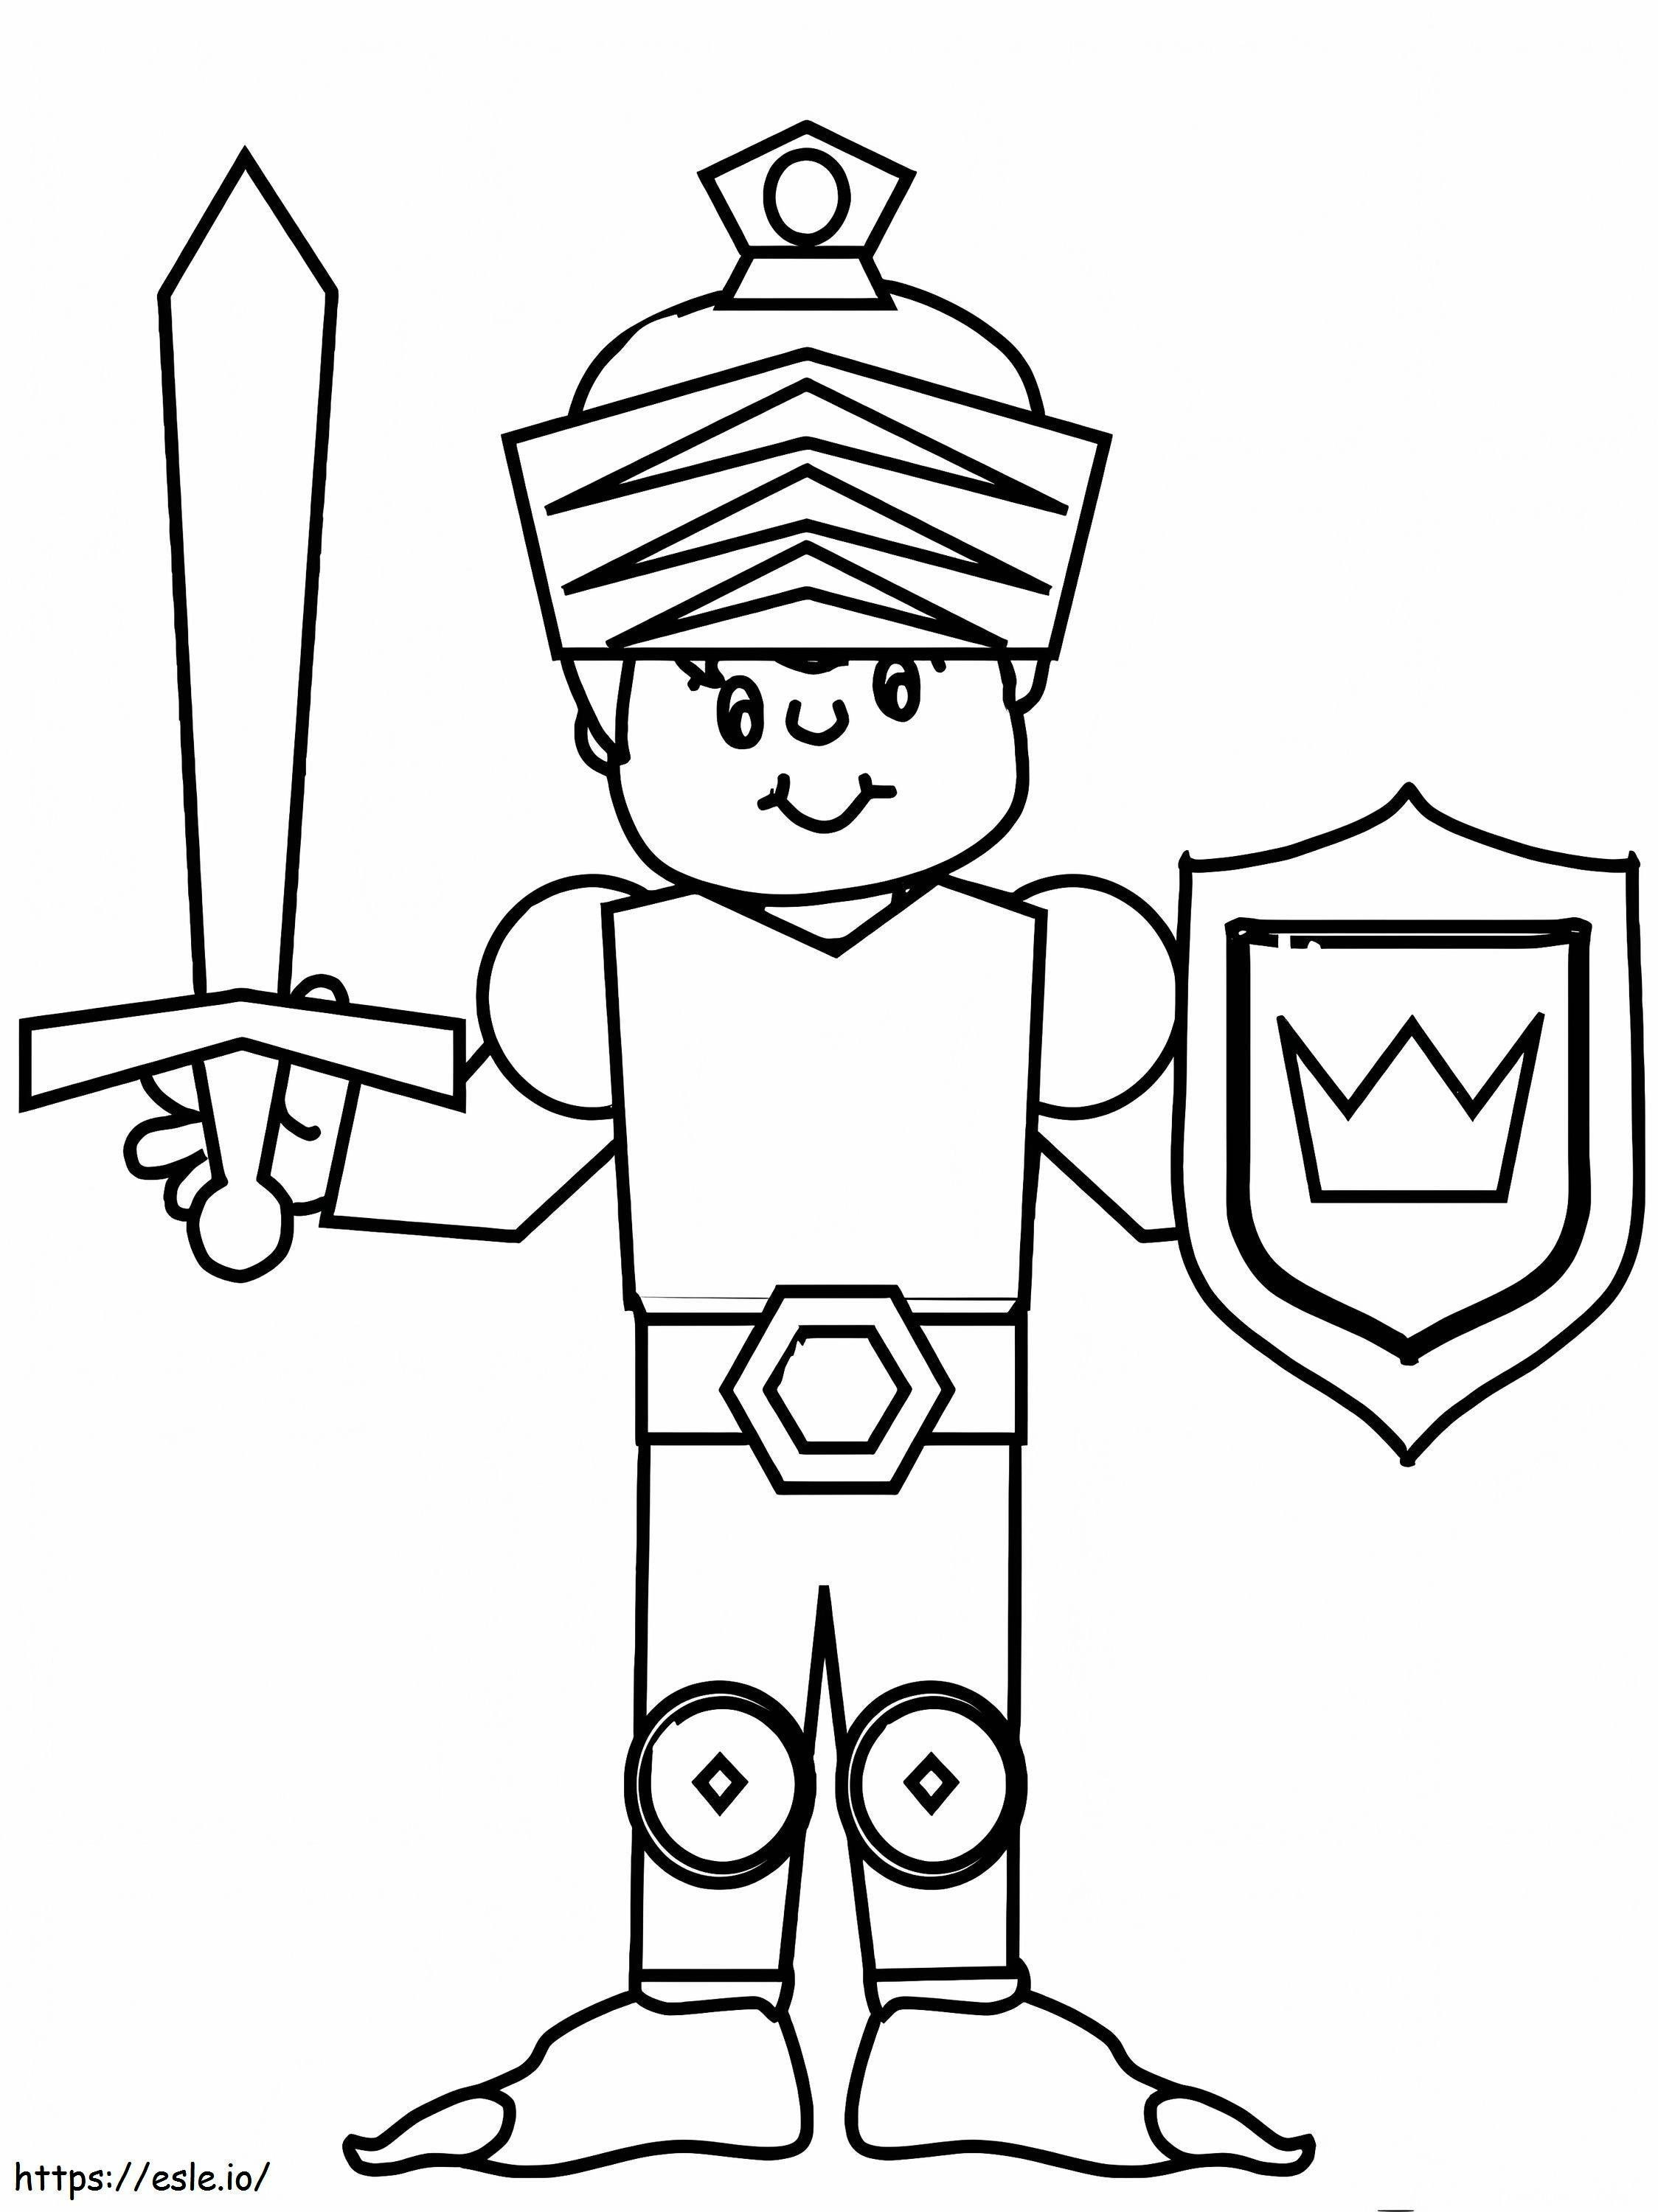 Boy Knight coloring page